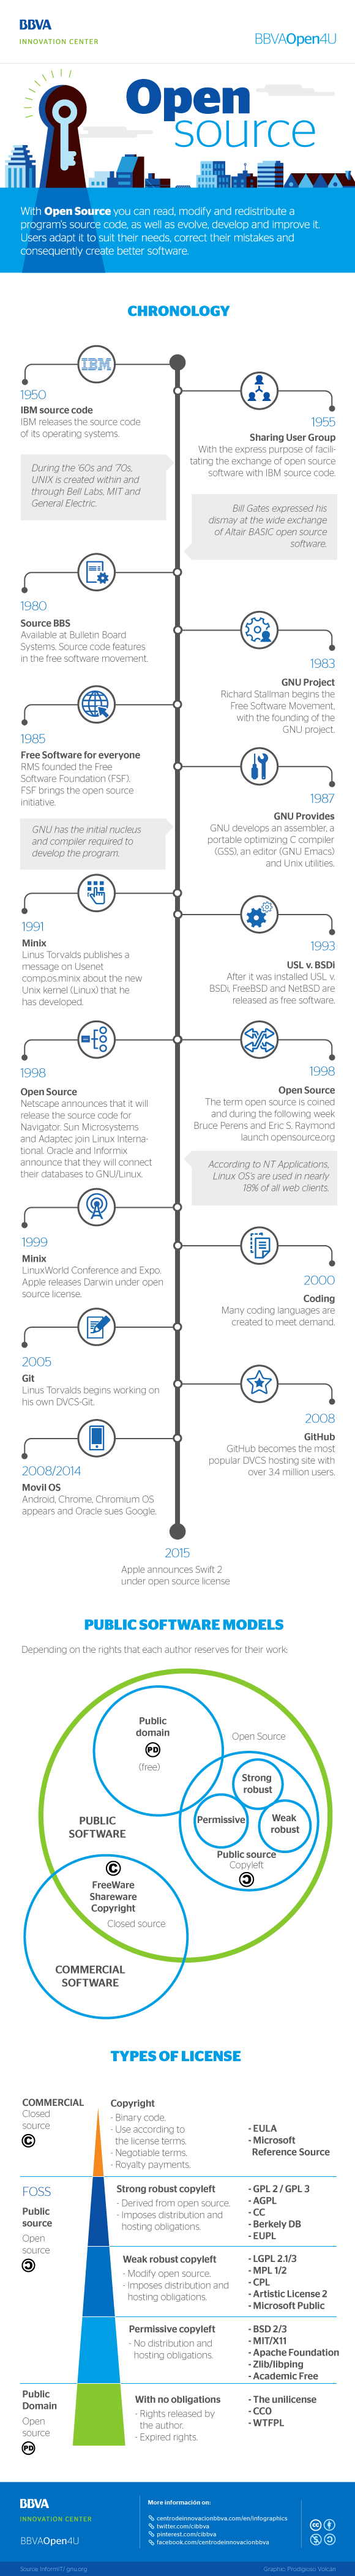 Infographic: Chronology of open source